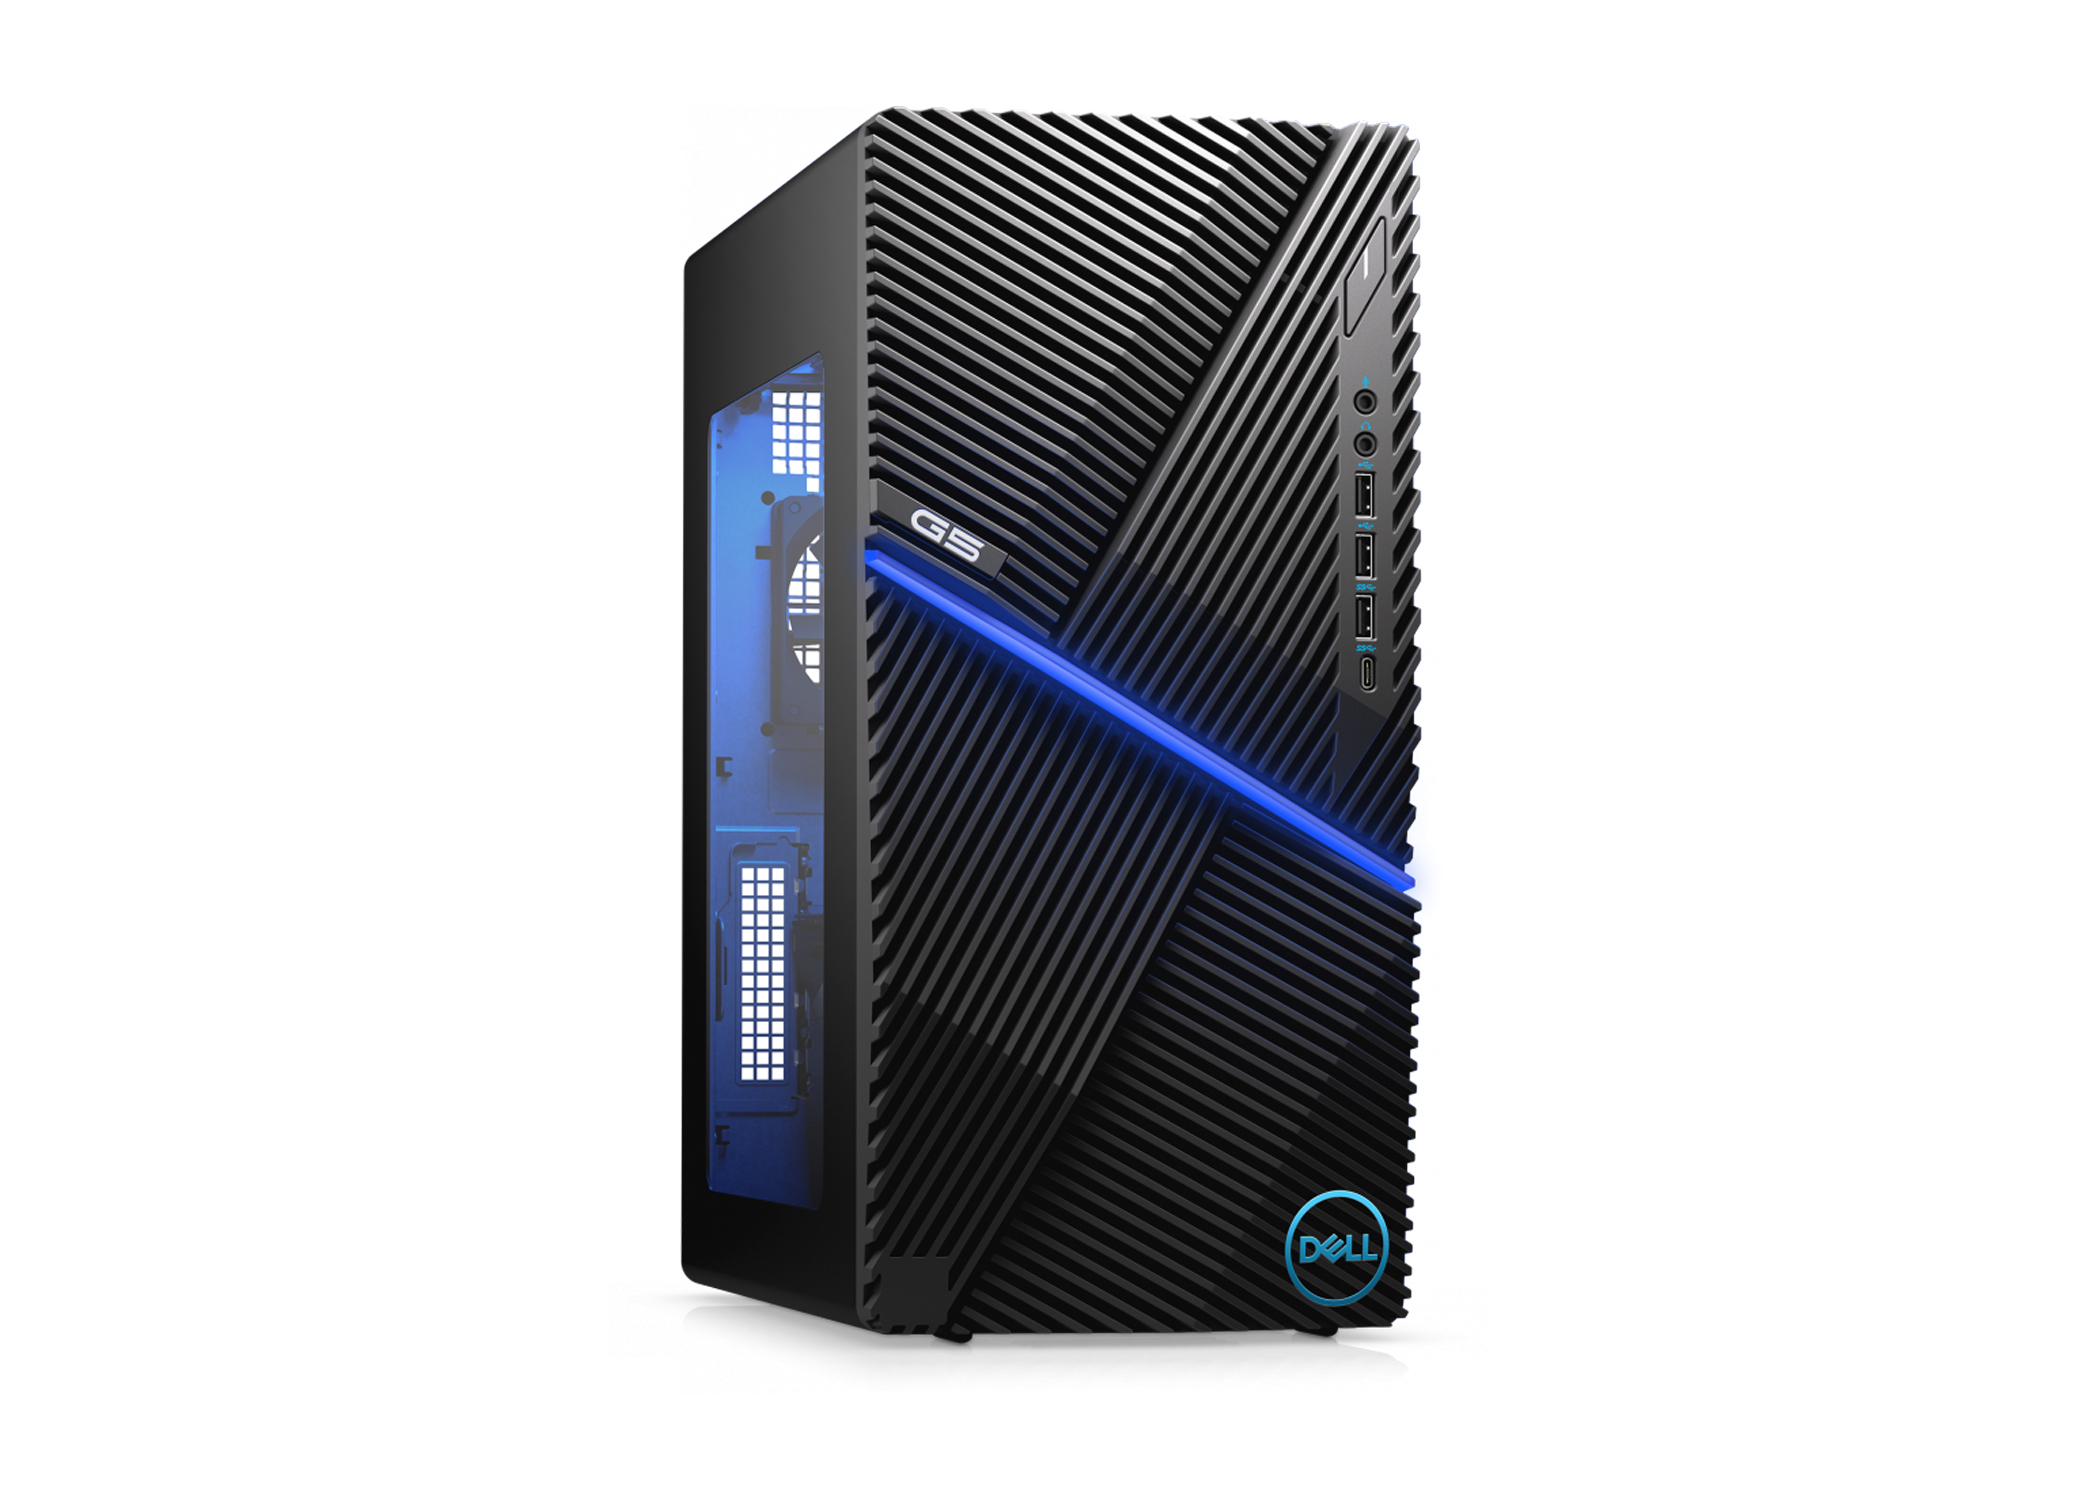 Dell G5 Gaming Desktop against a white background